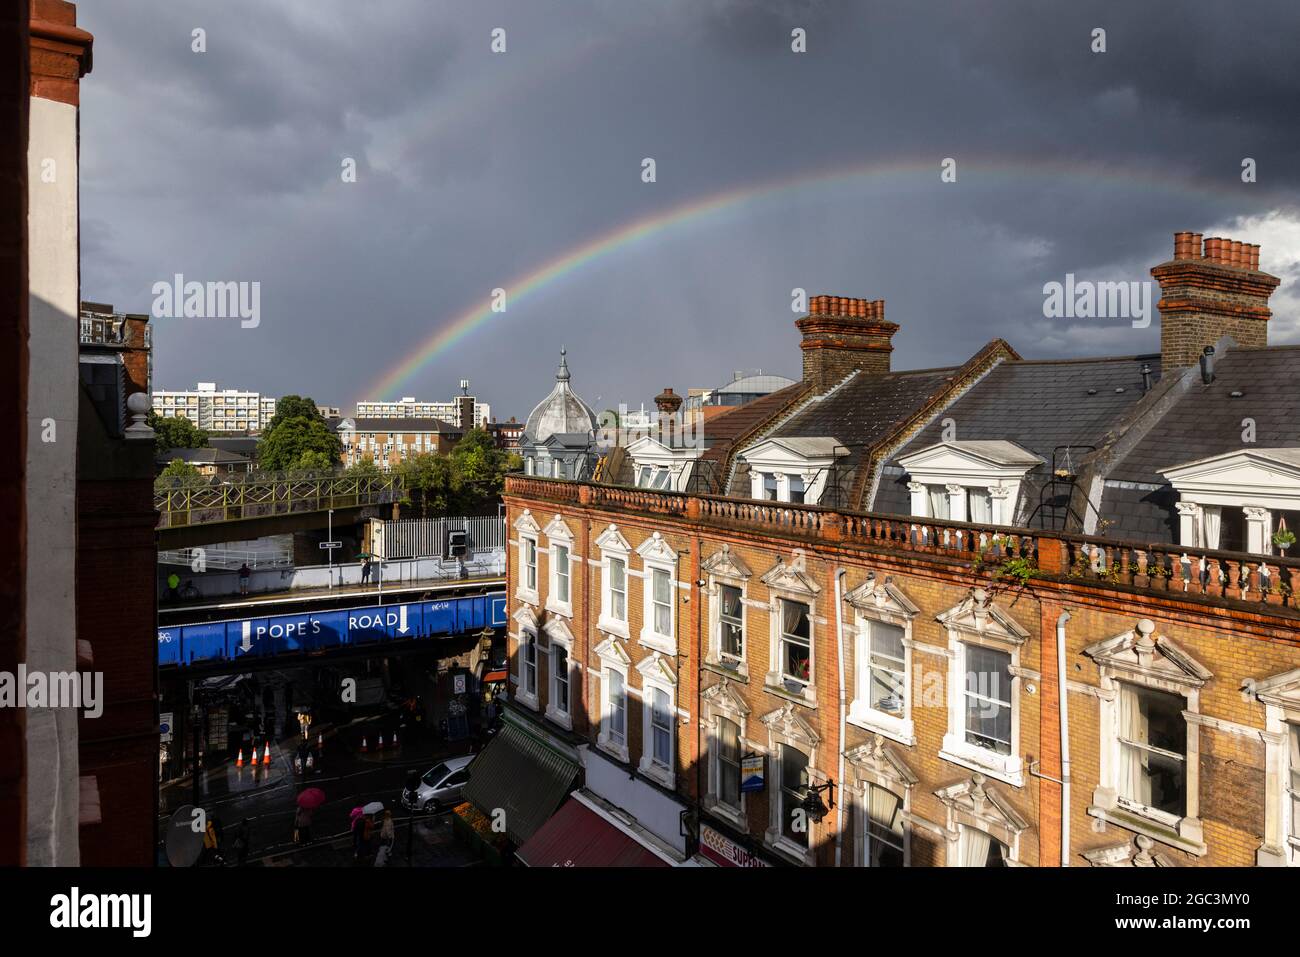 London, UK. 06th Aug, 2021. After a day of intermittent heavy rain, a rainbow is seen stretching over Electric Avenue, Brixton, London, UK. Credit: Joshua Windsor/Alamy Live News Stock Photo